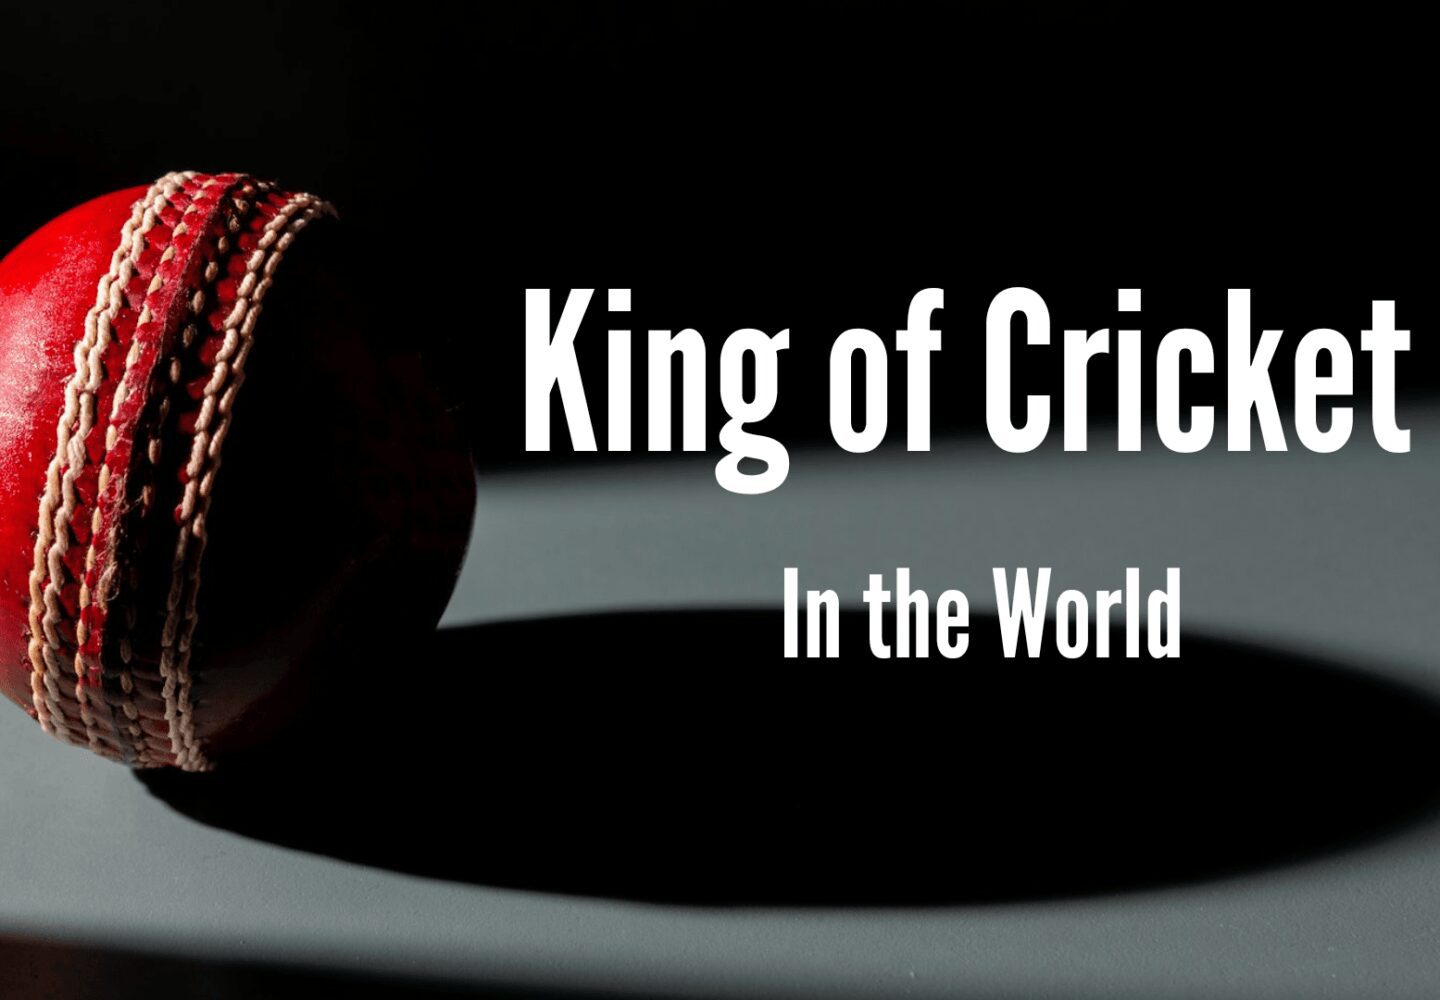 King of Cricket in the World